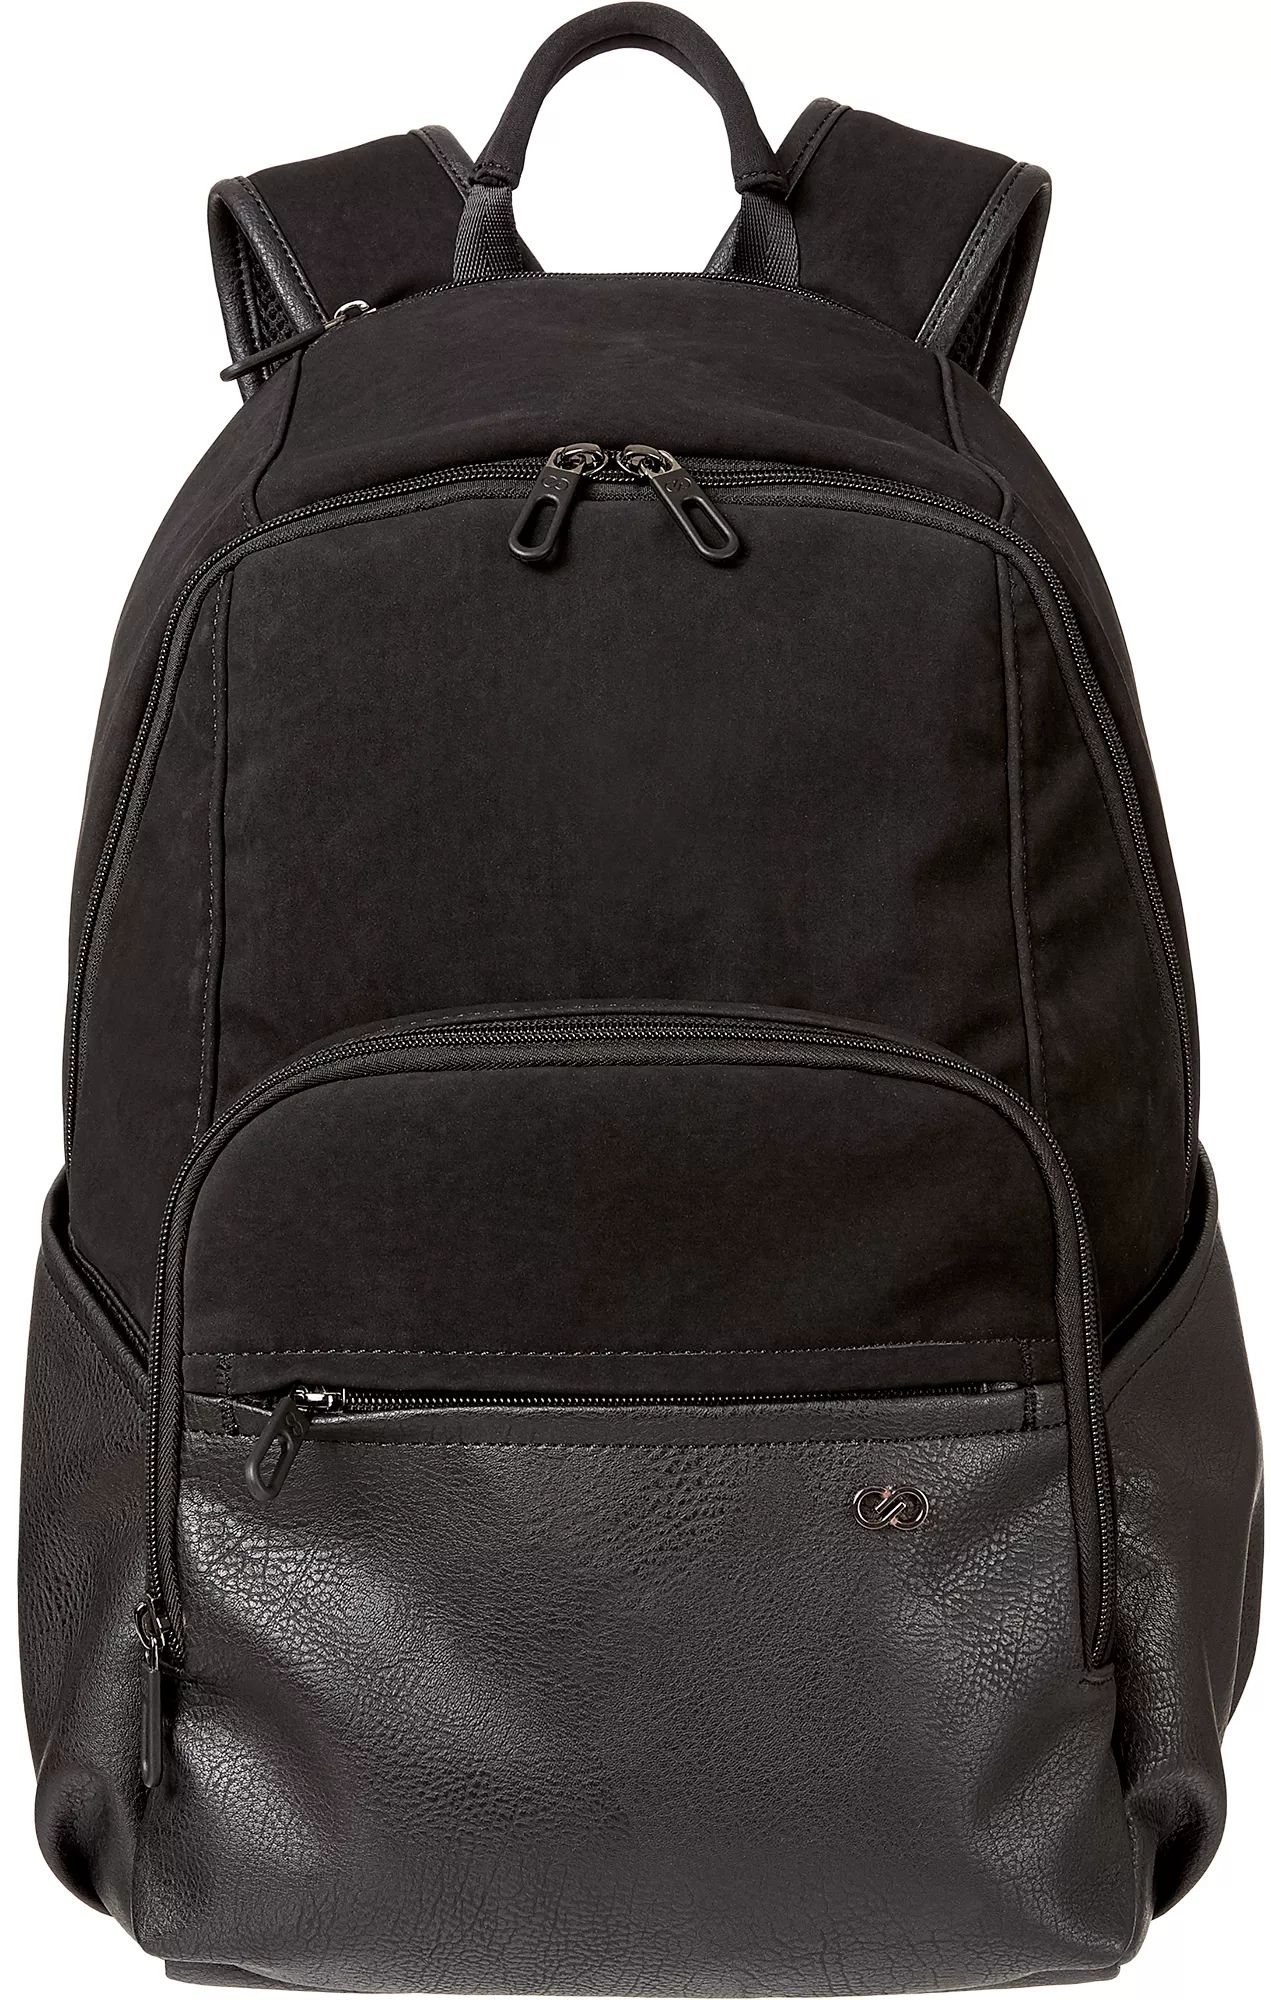 CALIA by Carrie Underwood Everyday Backpack | Dick's Sporting Goods